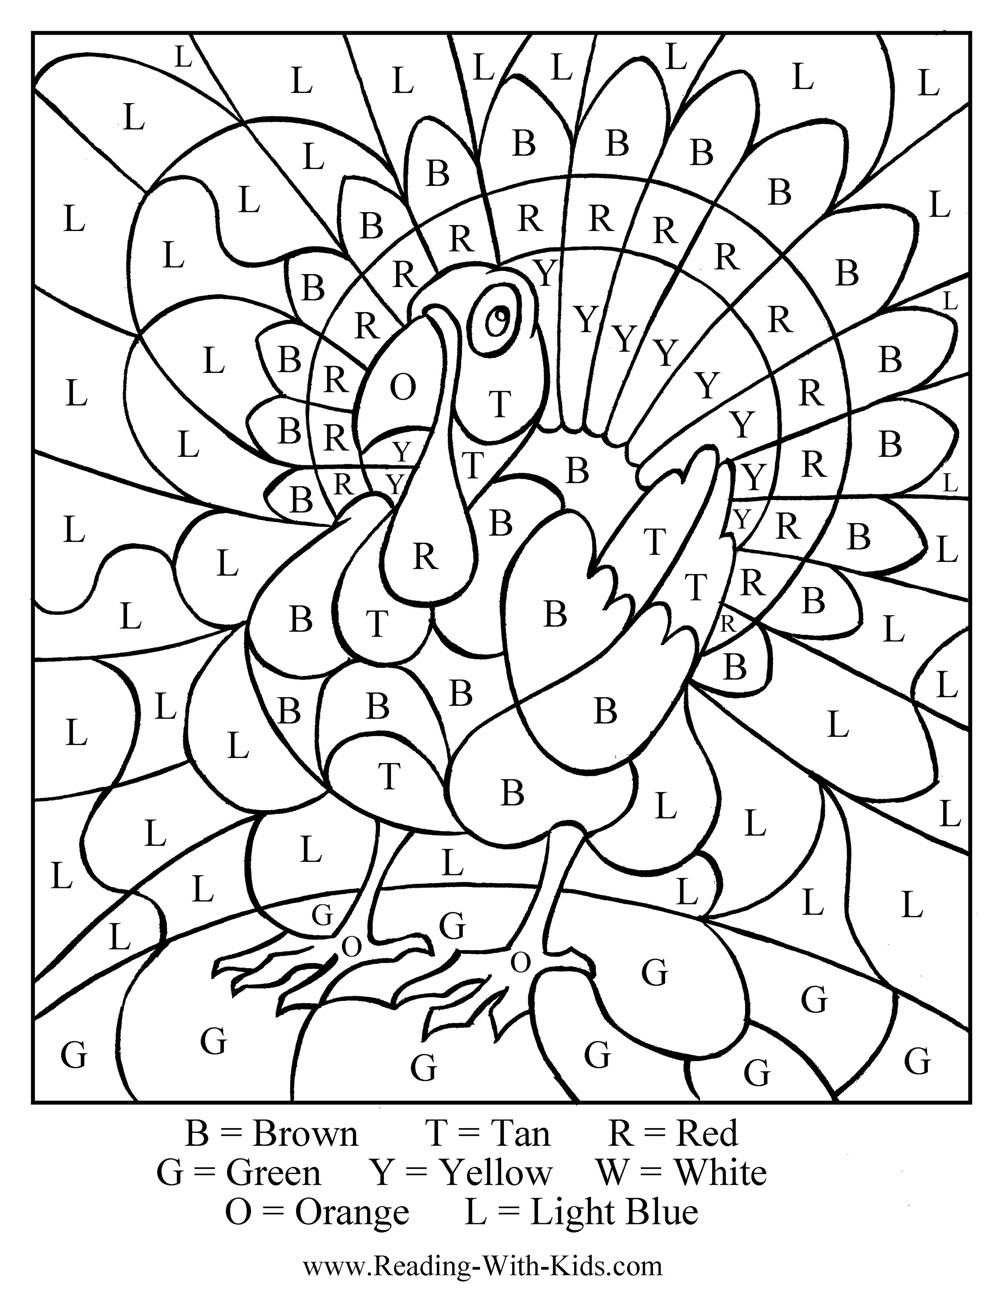 Thanksgiving Kids Coloring Pages
 Free Thanksgiving Coloring Pages & Games Printables